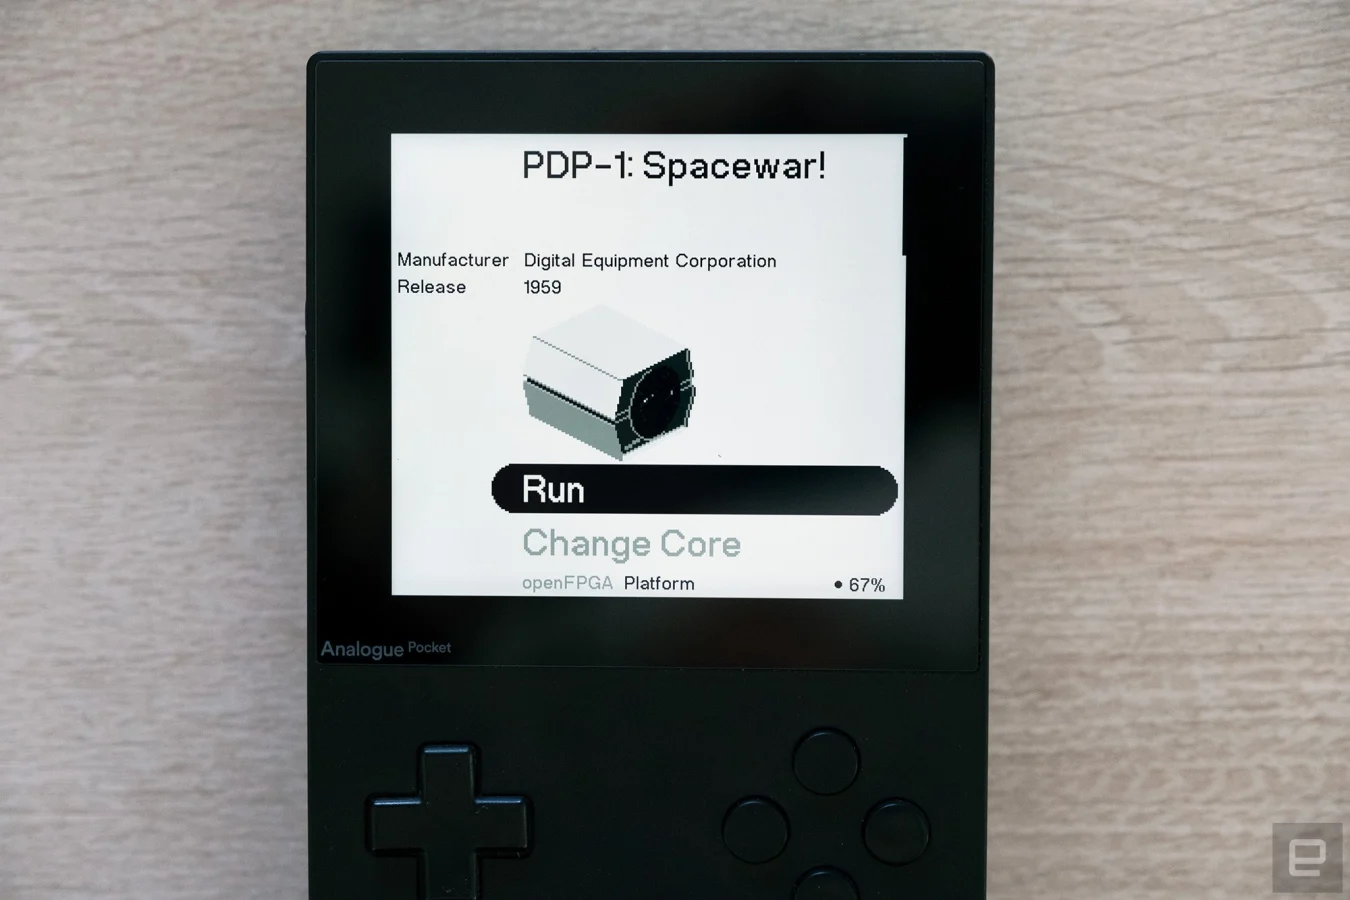 The Analogue Pocket gaming handheld shown with the first third party-developed core.  This core allows Pocket owners to play one of the first videogames - Spacewar!